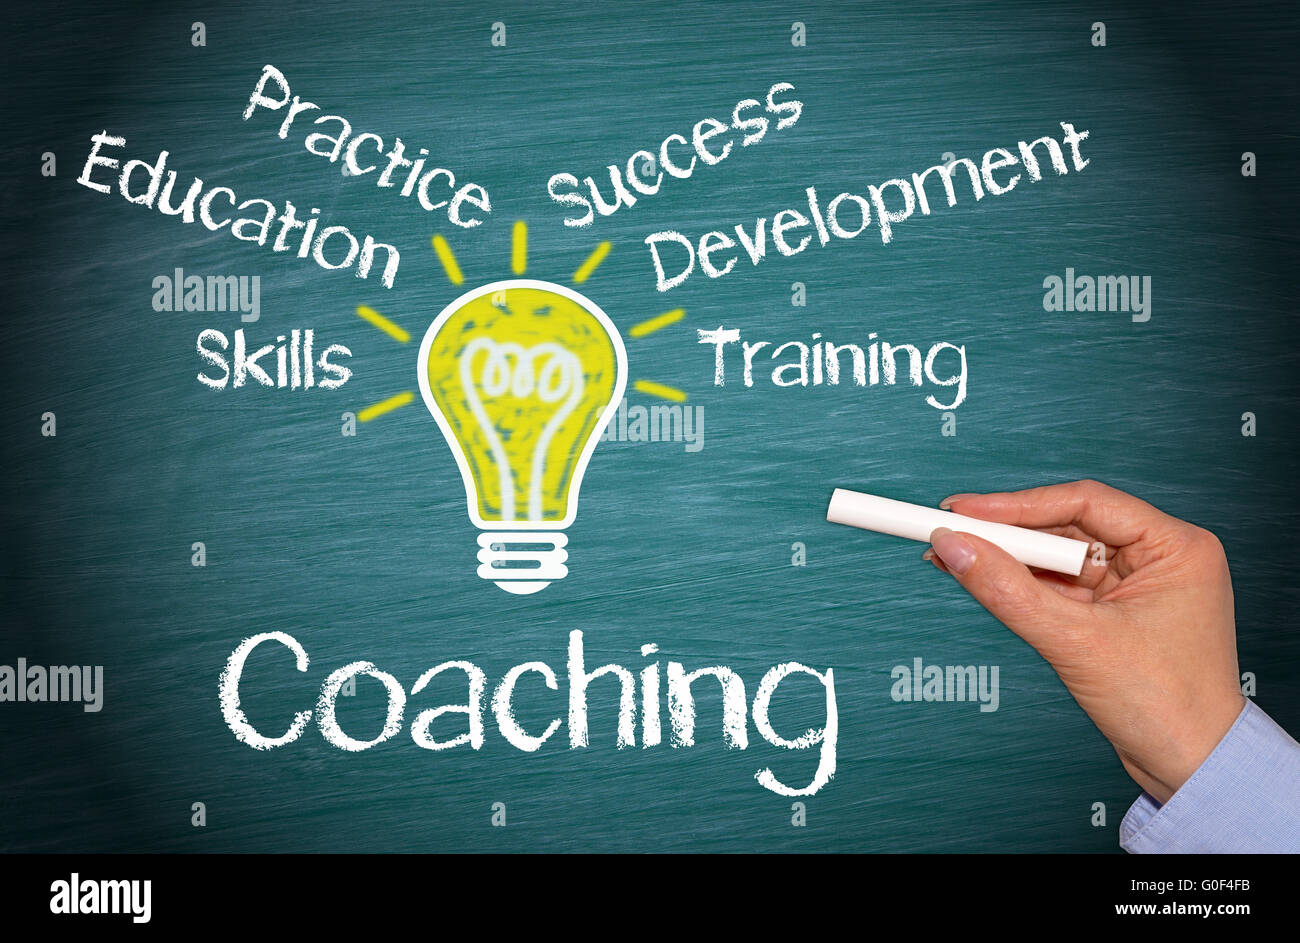 Coaching Business Concept Stock Photo